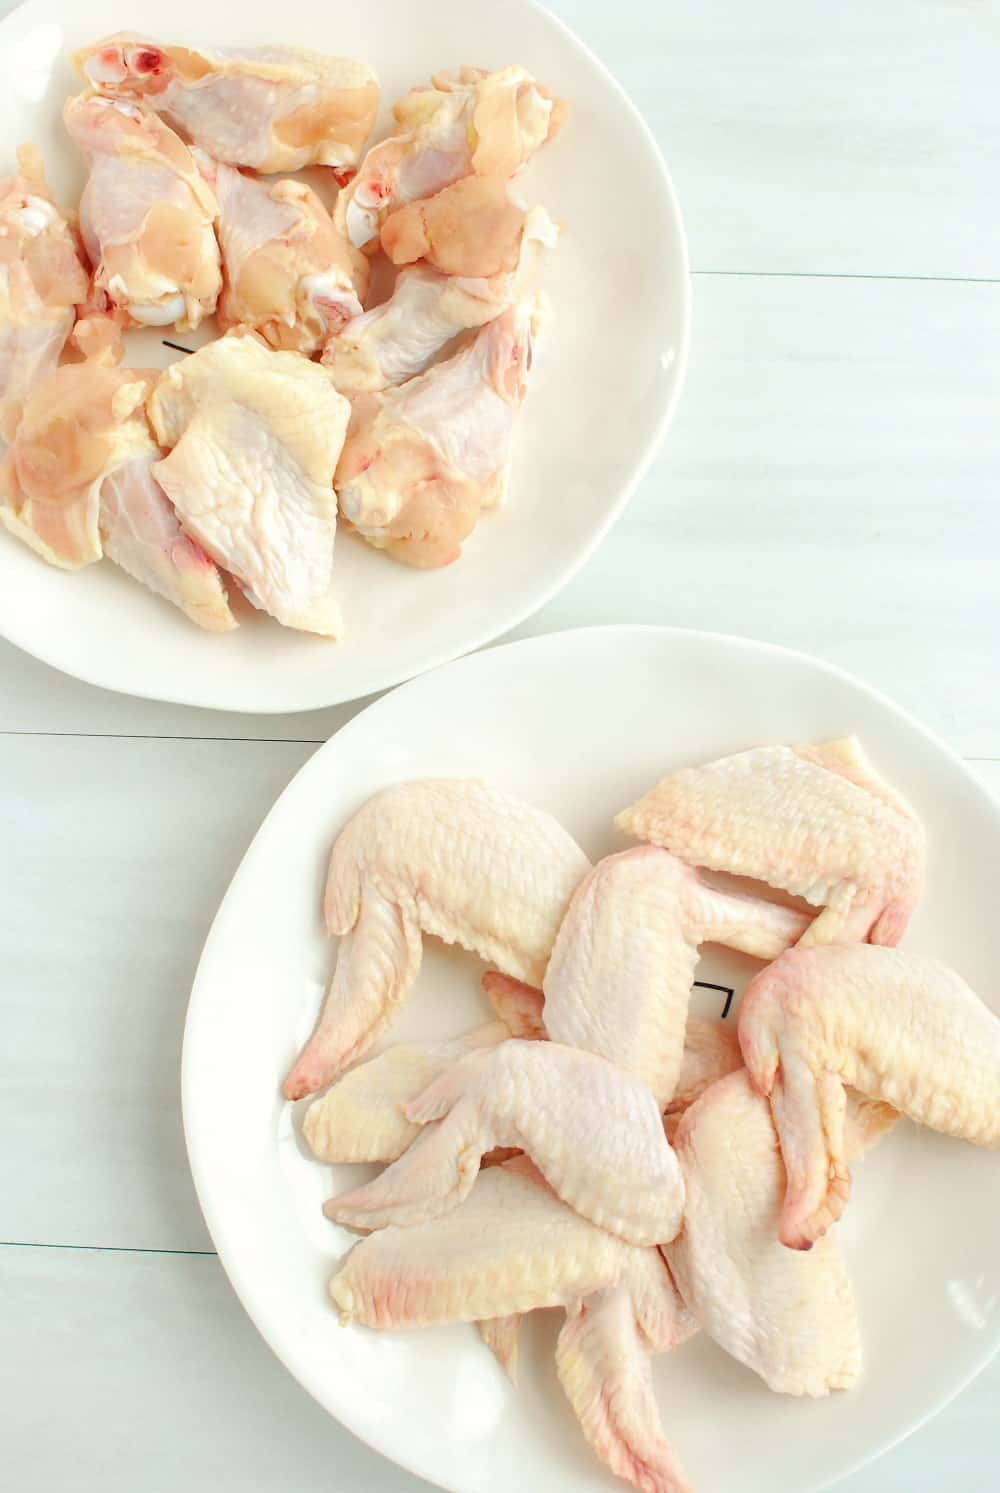 Uncooked chicken wings on white plates.